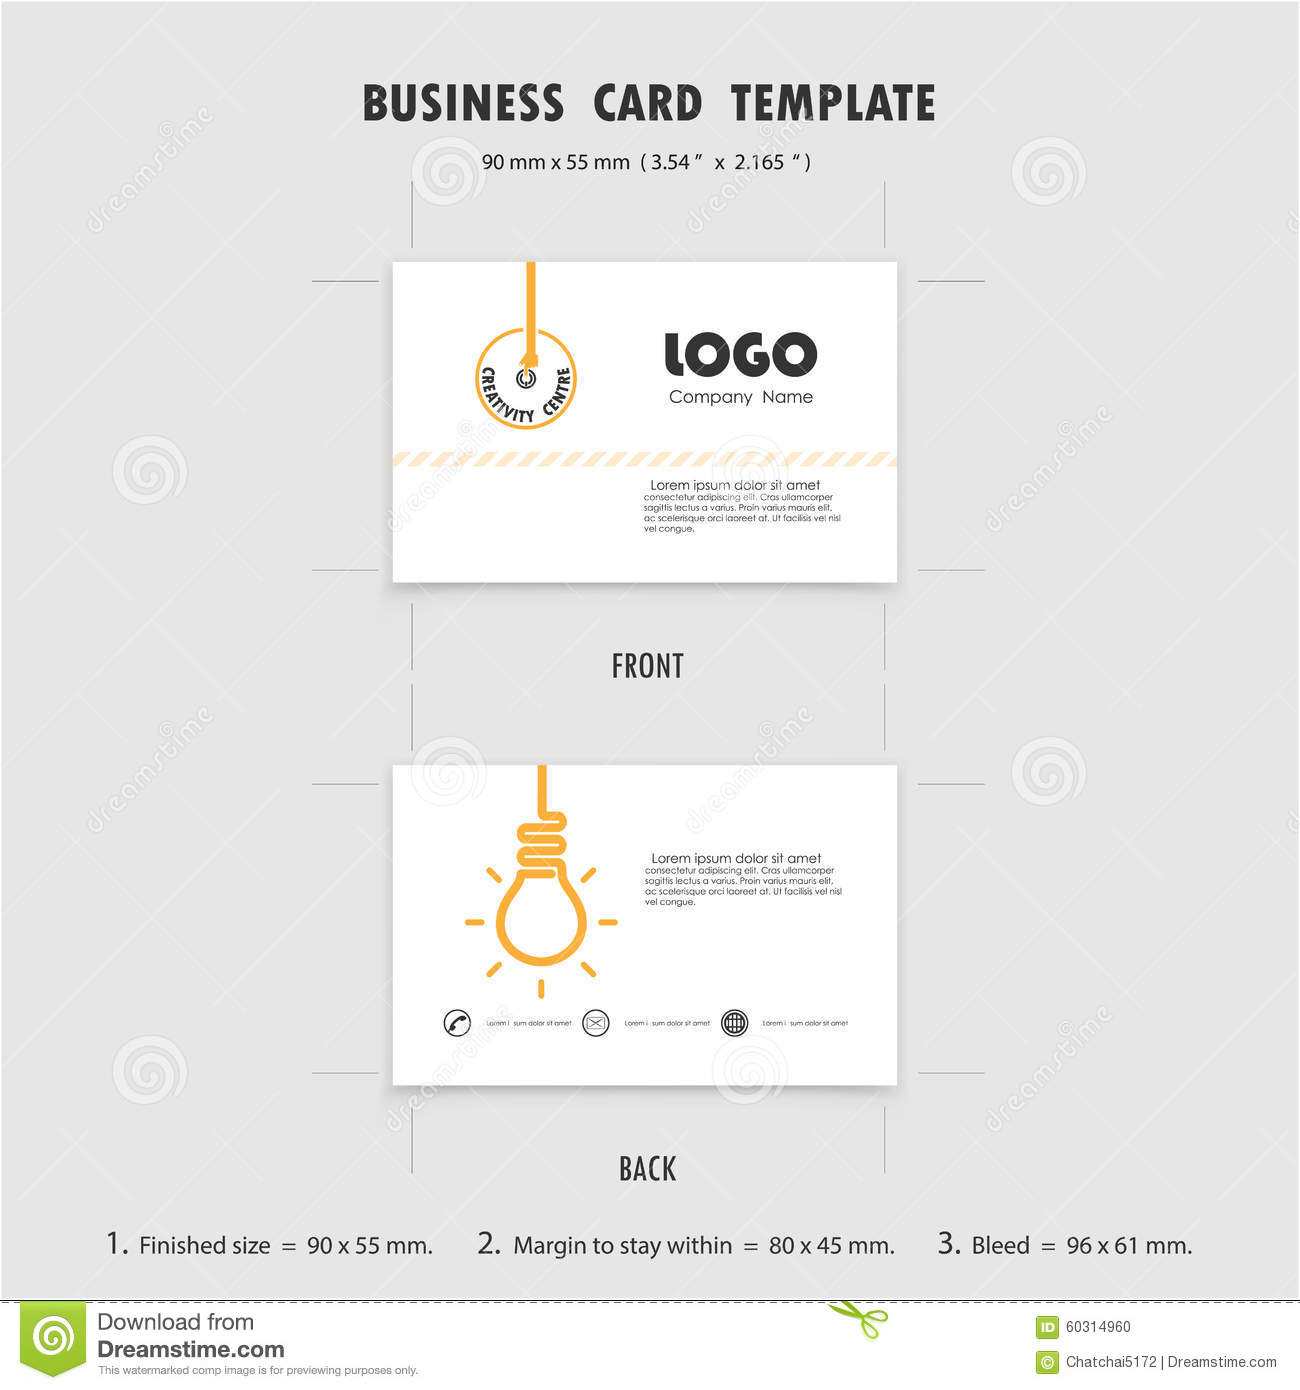 76 Standard Business Card Template 90Mm X 50Mm Now by Business Card Template 90Mm X 50Mm